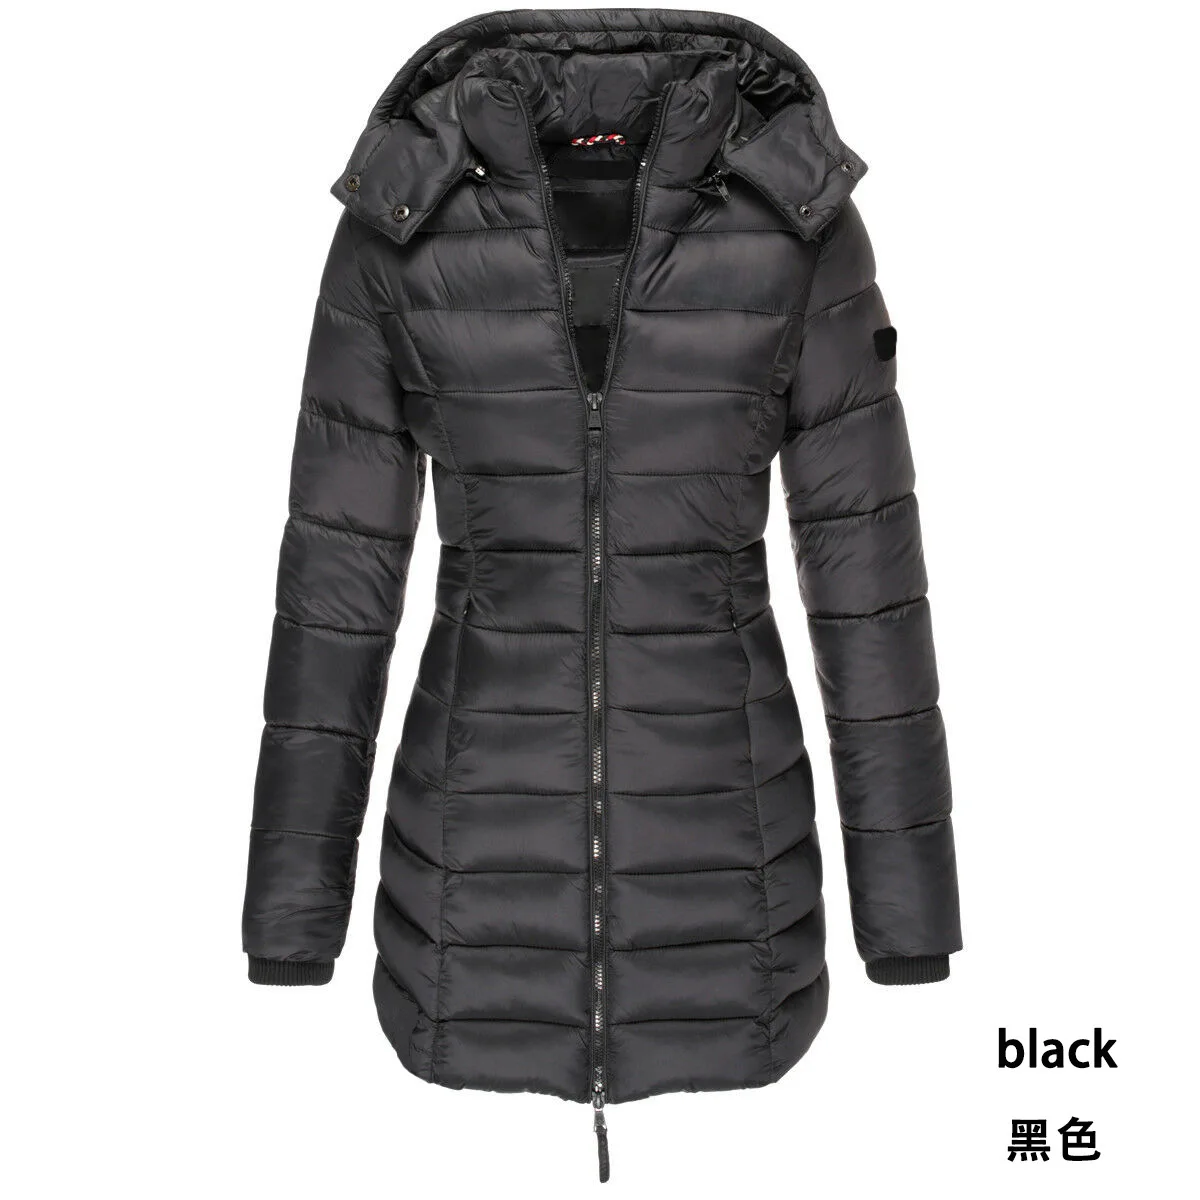 Autumn and Winter Warm Jacket New Women's Mid-length Fashion Slim-fit Padded Jacket Warm Hooded Down Padded Jacket Women's